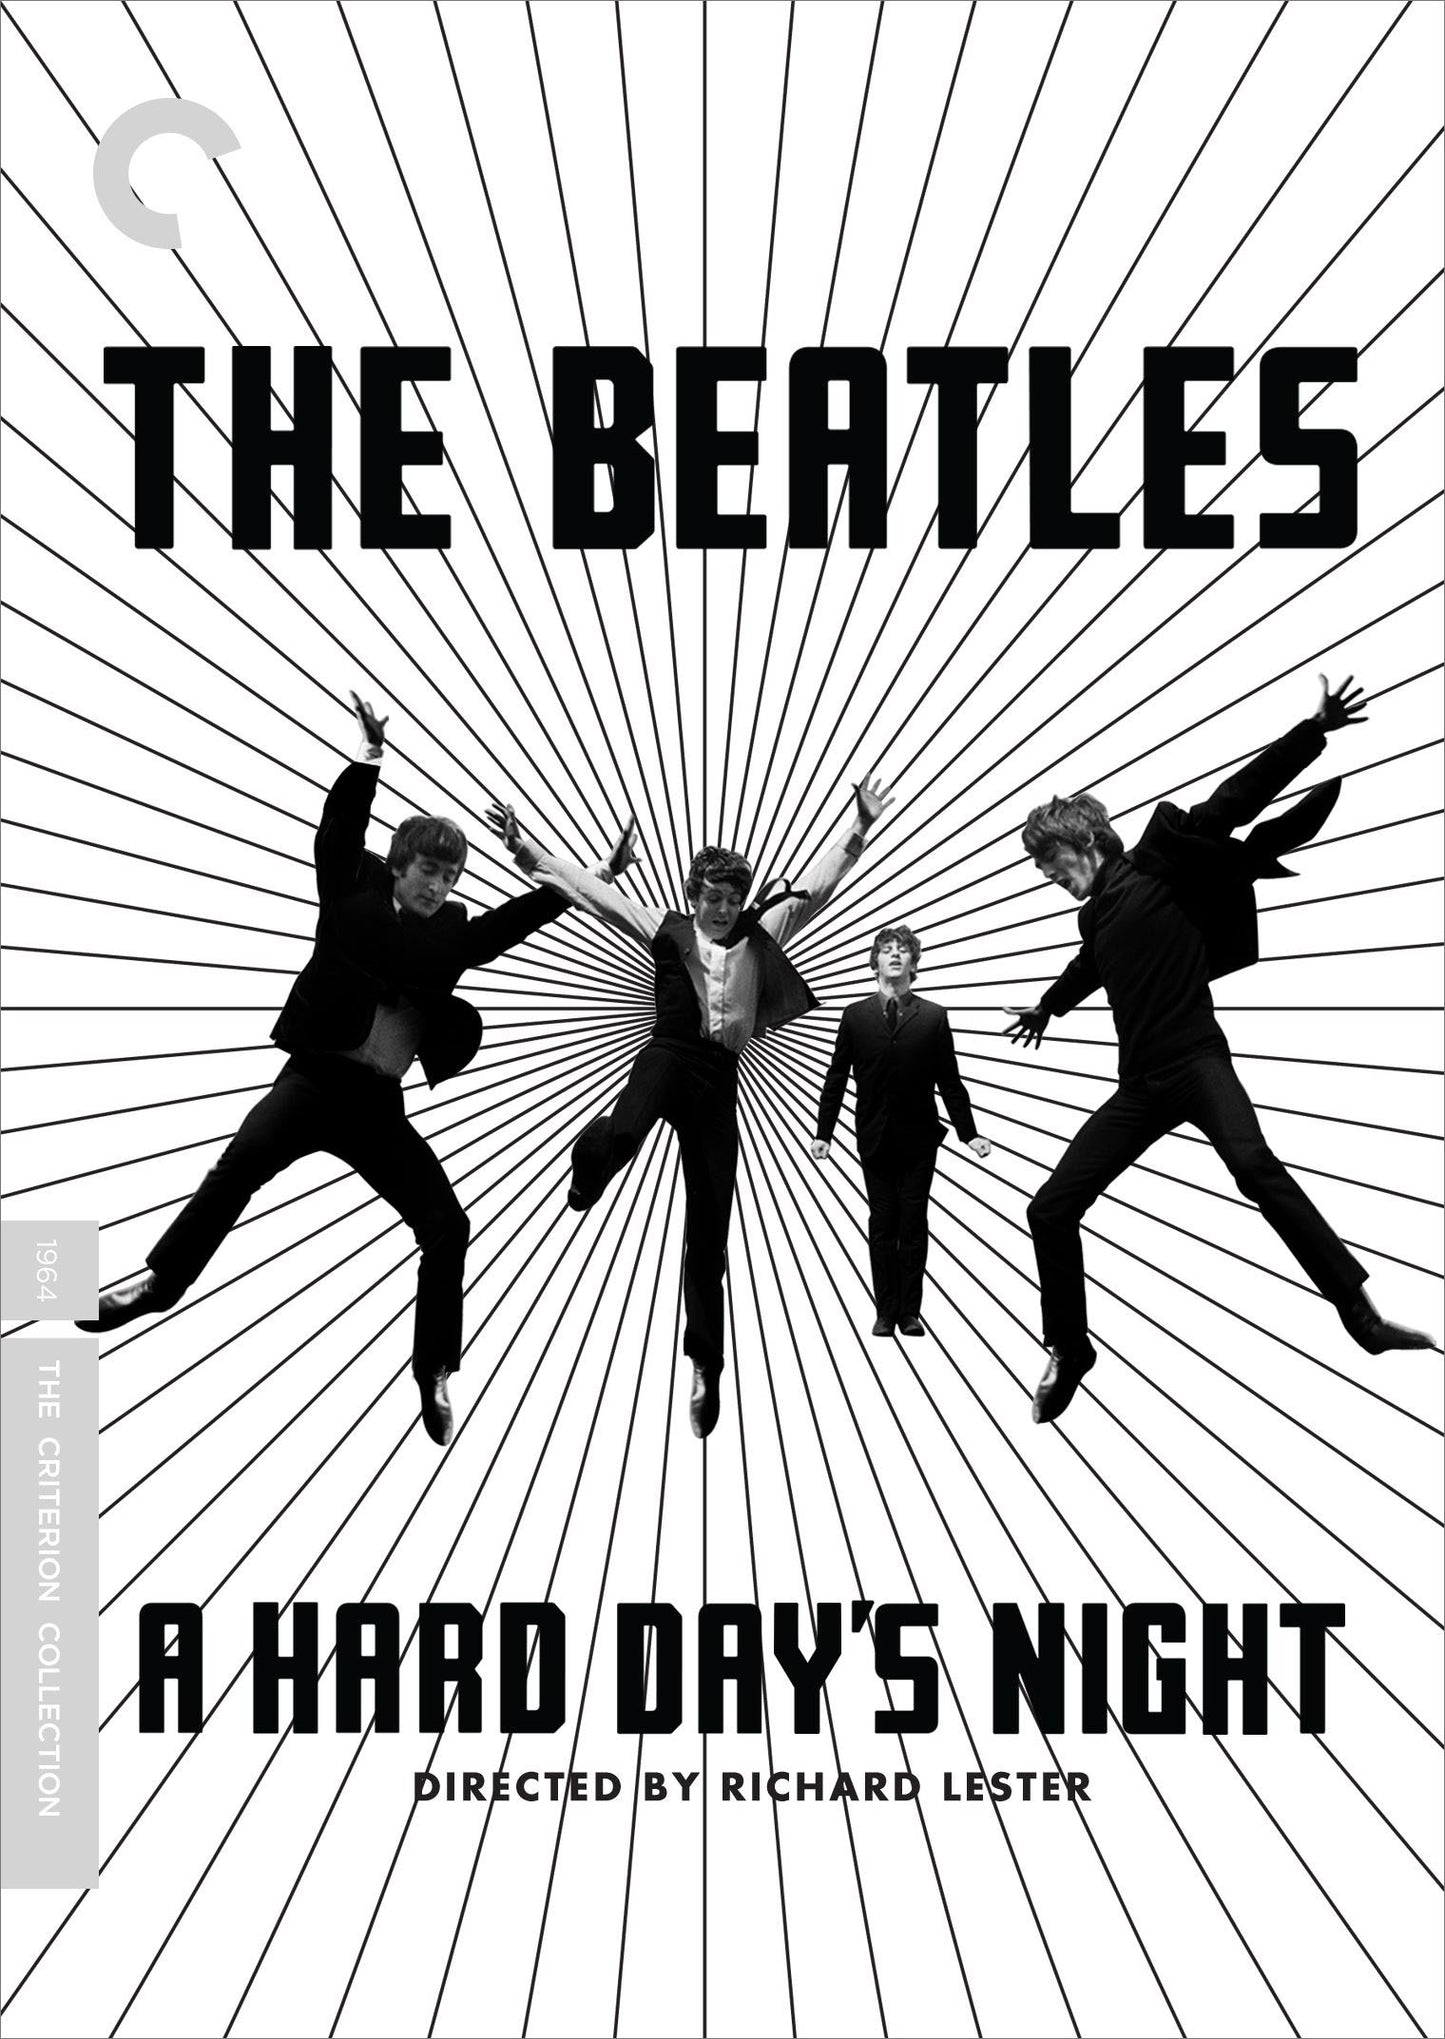 Hard Day's Night [Criterion Collection] cover art